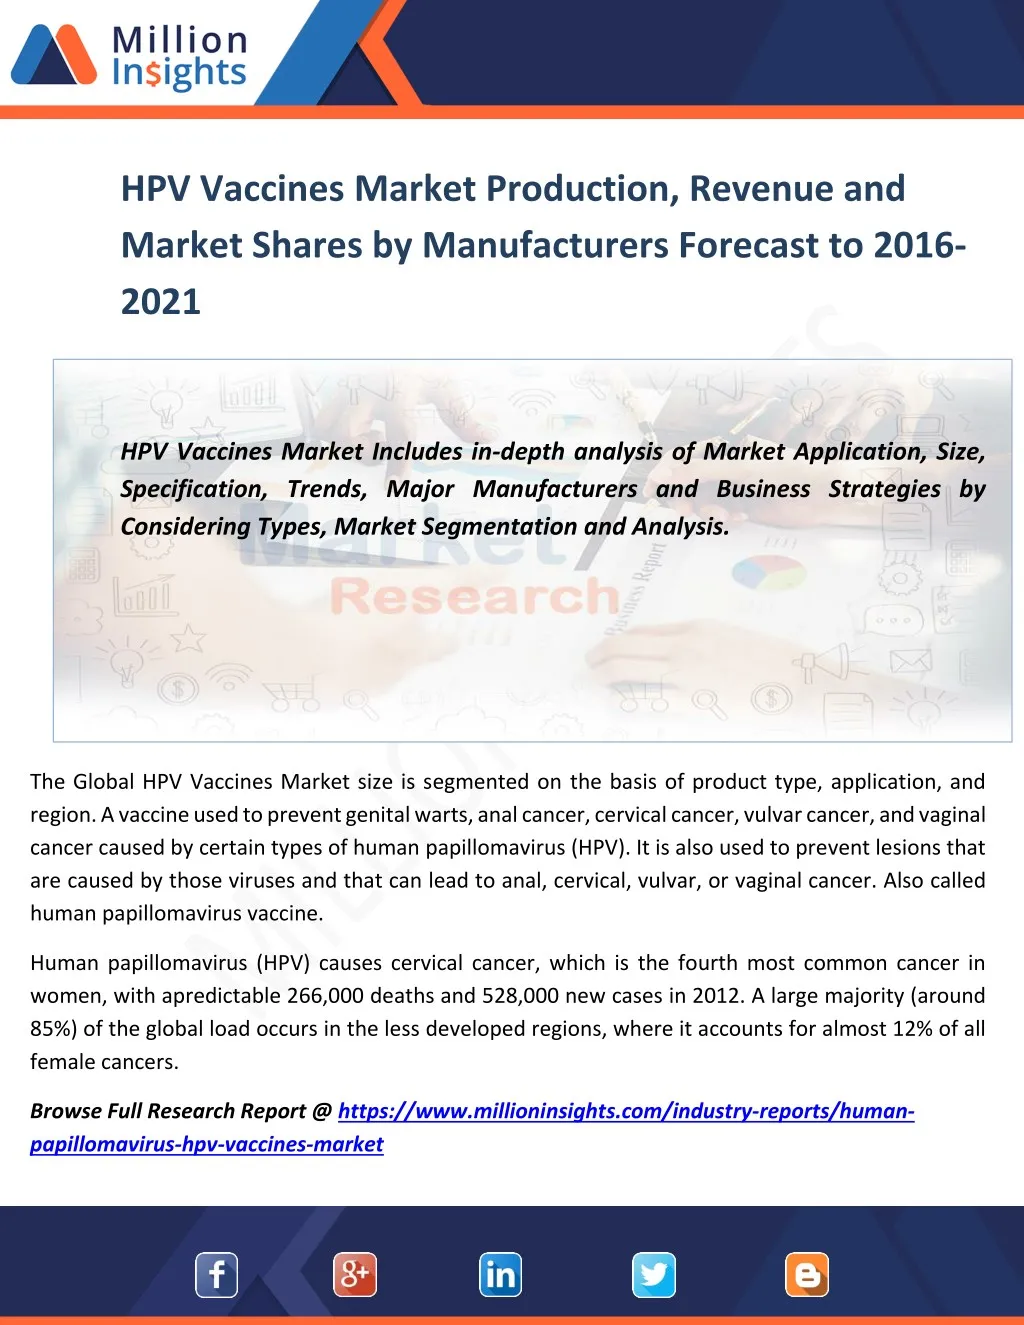 hpv vaccines market production revenue and market